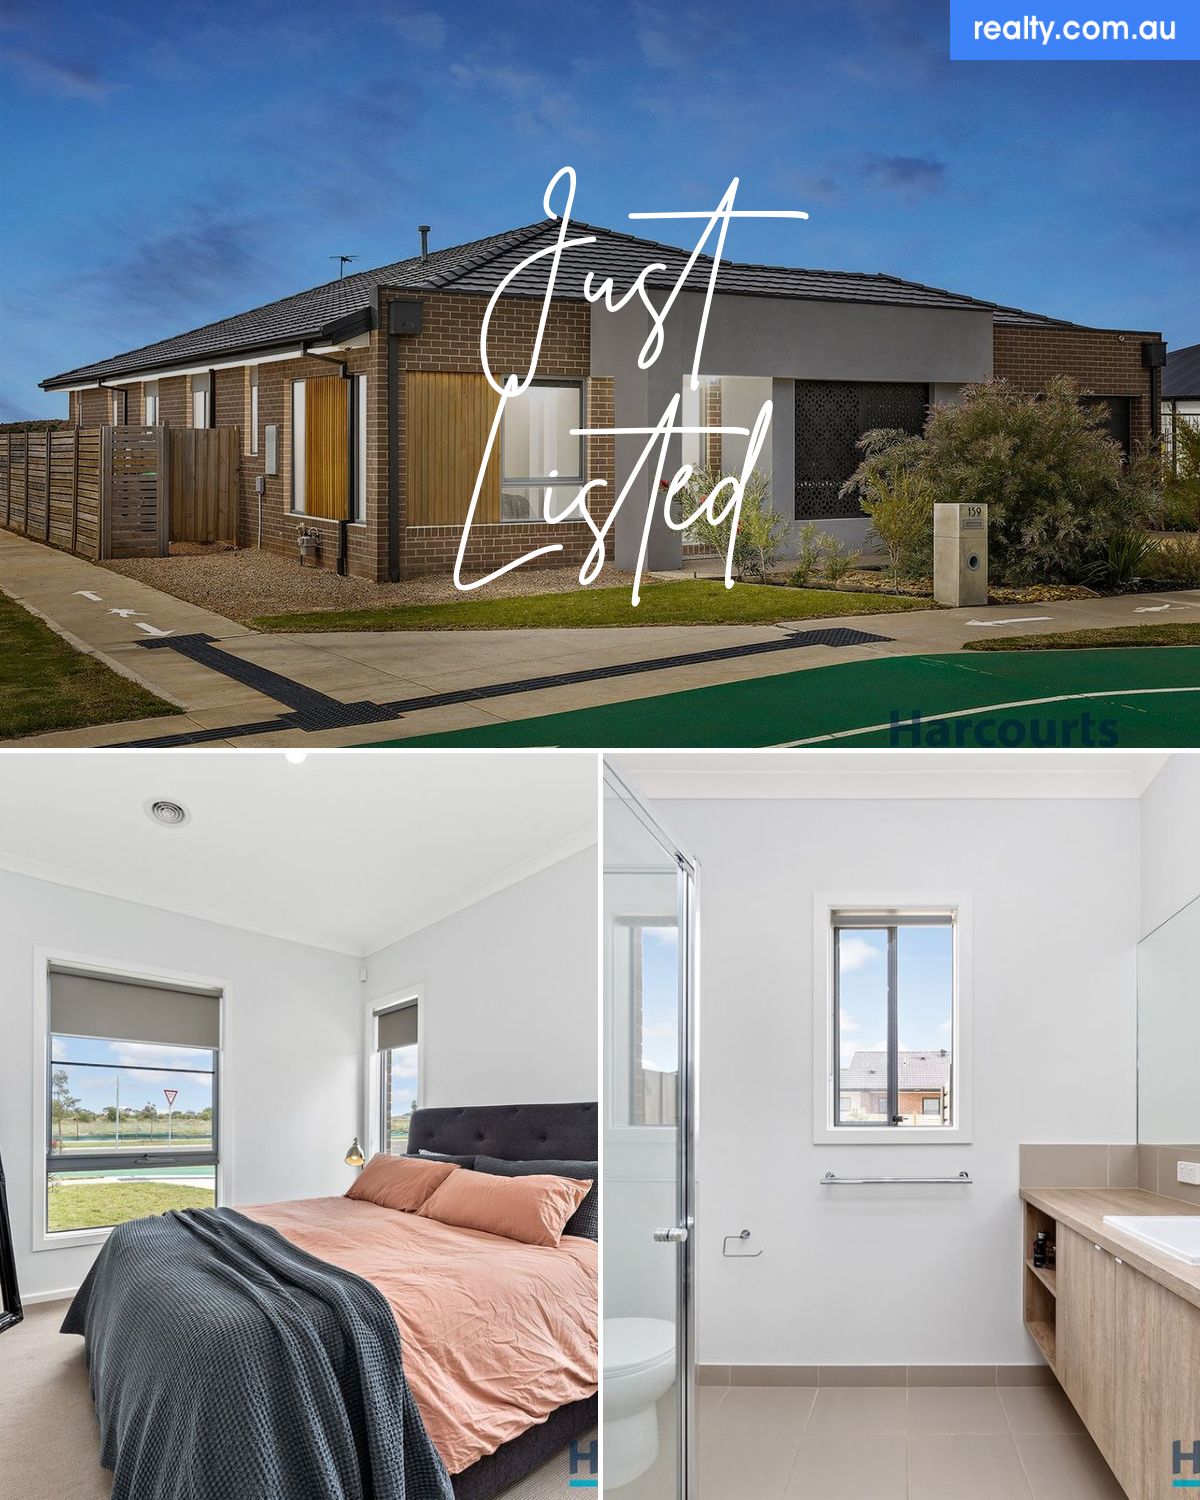 159 Stanmore Crescent, Wyndham Vale, VIC 3024 | Realty.com.au